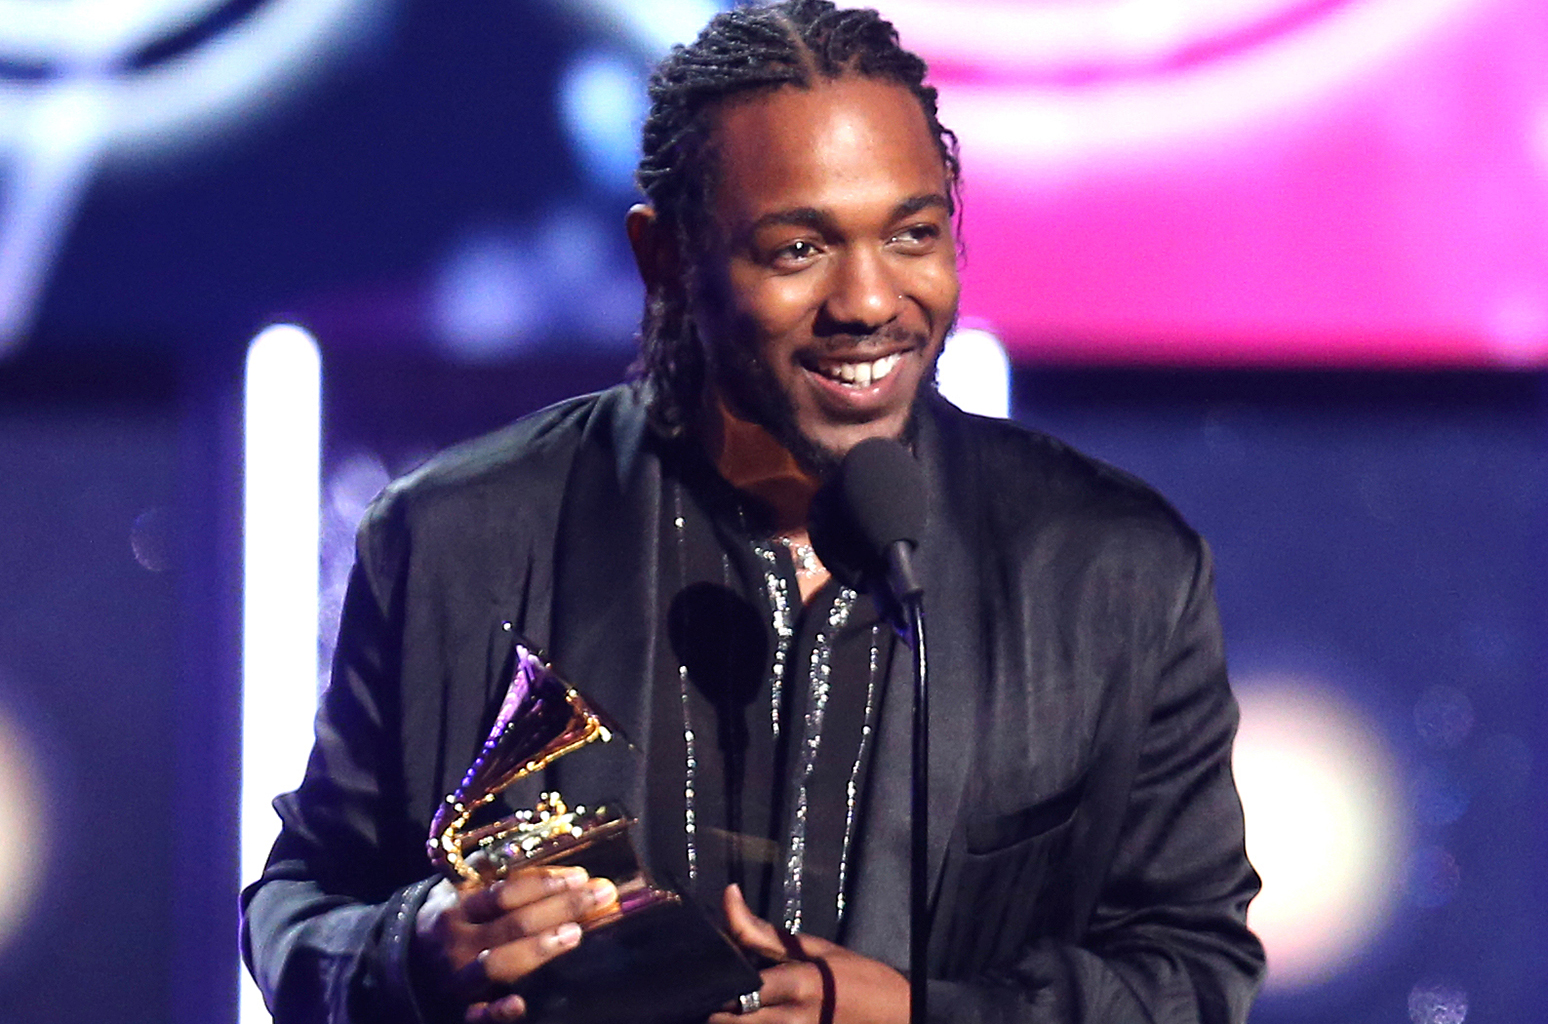 We Know the Name of Your Next S.O. Based on the Male Celebs You Pick Kendrick Lamar grammy